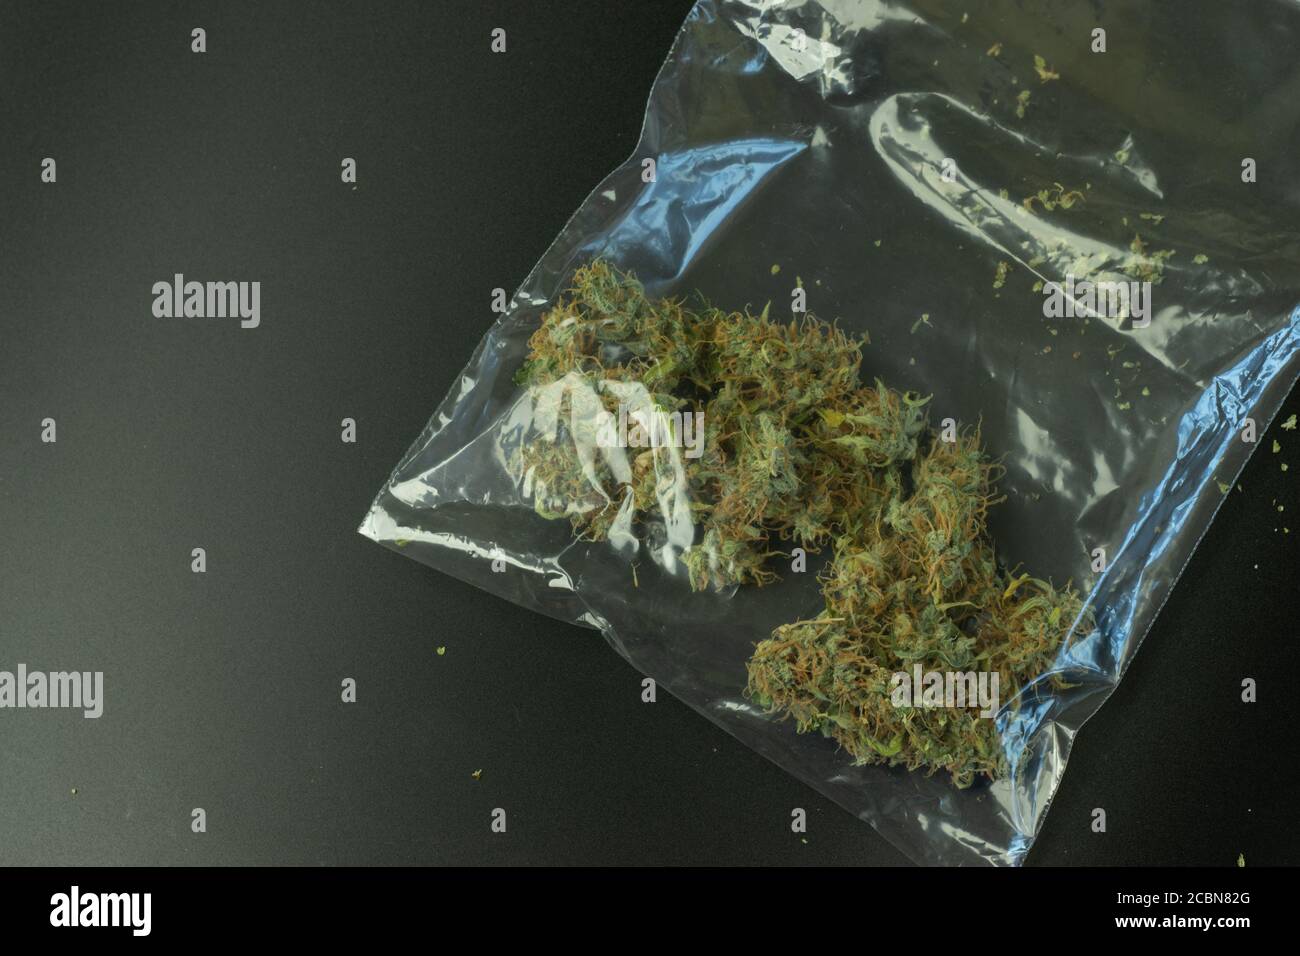 Package zip lock with cannabis buds. Street drug business. Illegal marijuana selling. Criminal weed concept Stock Photo